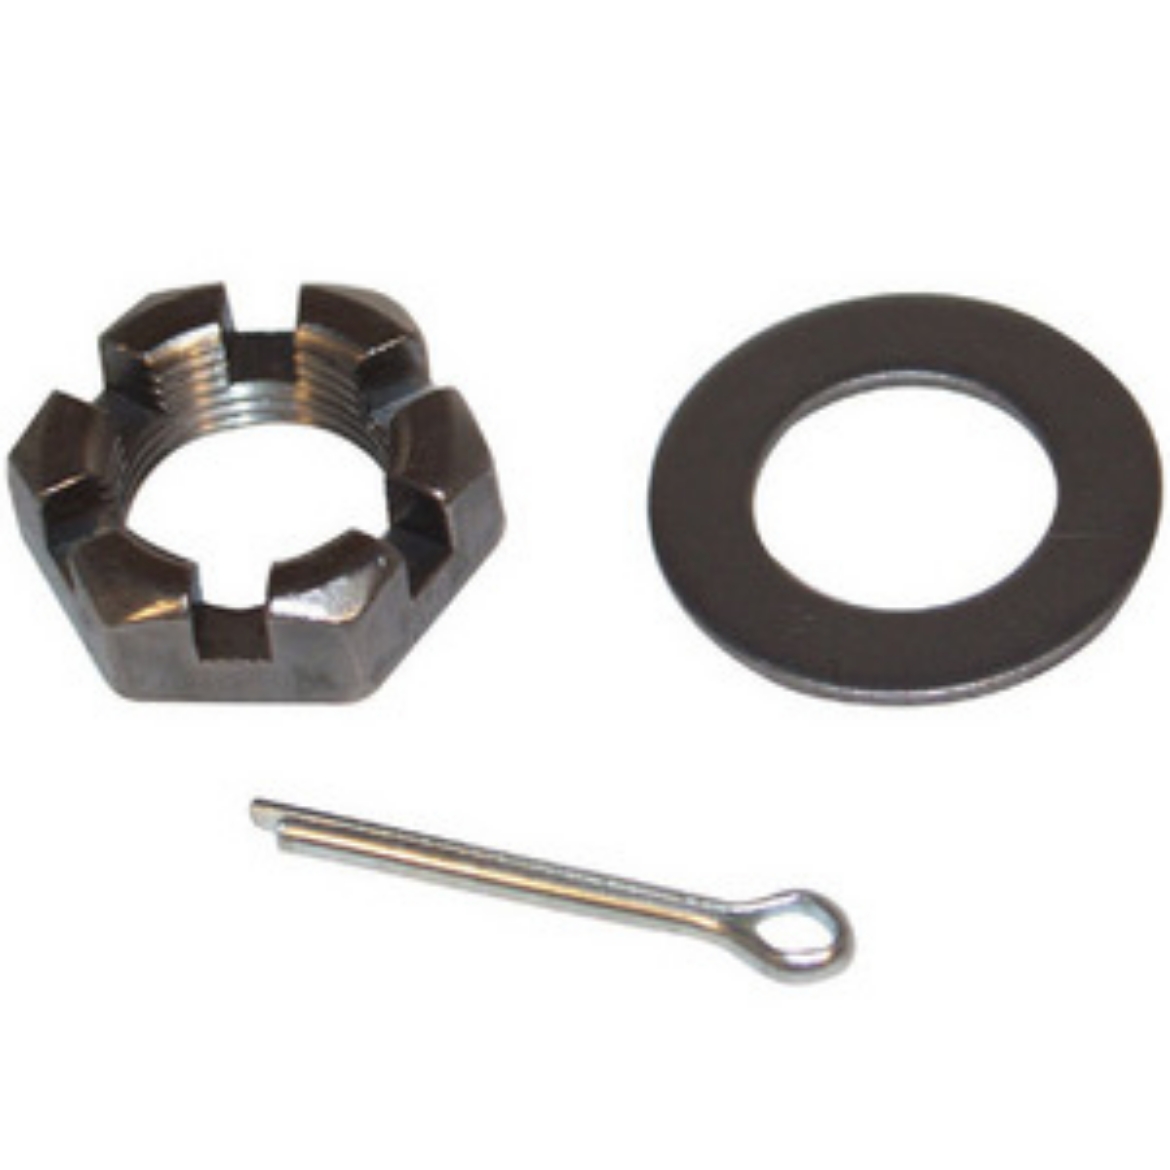 Picture of LM/SLIMLINE 3/4" AXLE NUT KIT (3/4"-16UNF)
(Kit Includes 190001, 190002, 190003)